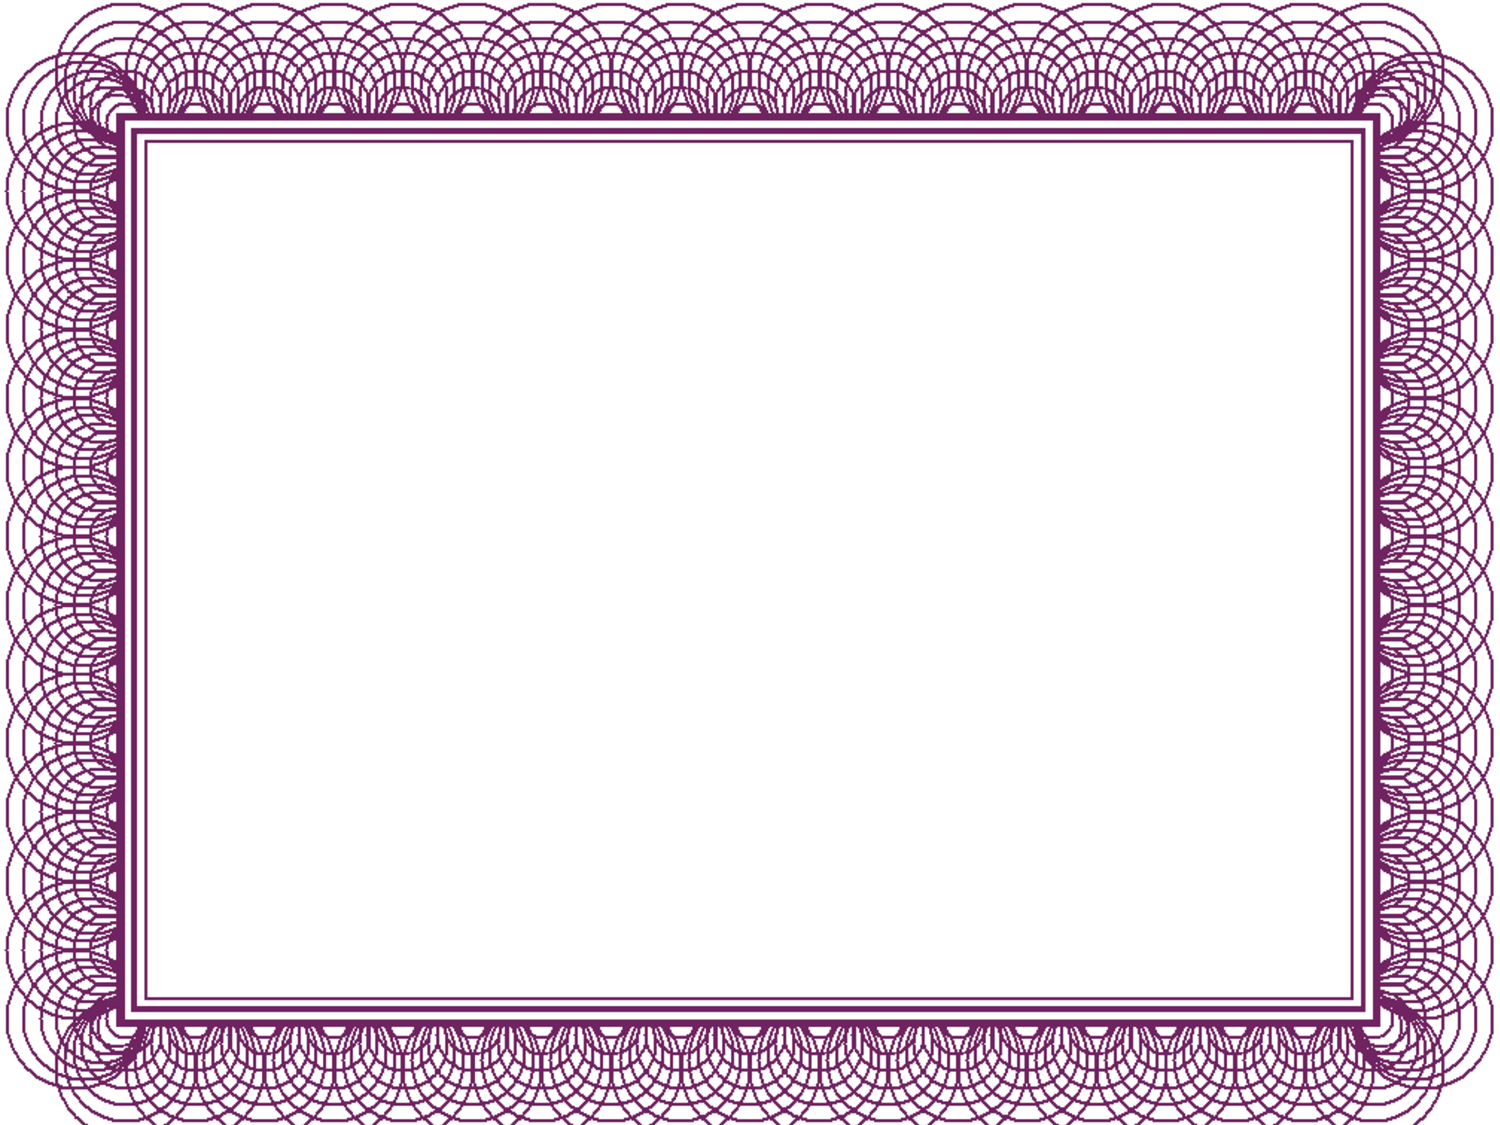 7-best-images-of-free-printable-purple-borders-and-frames-free-printable-clip-art-borders